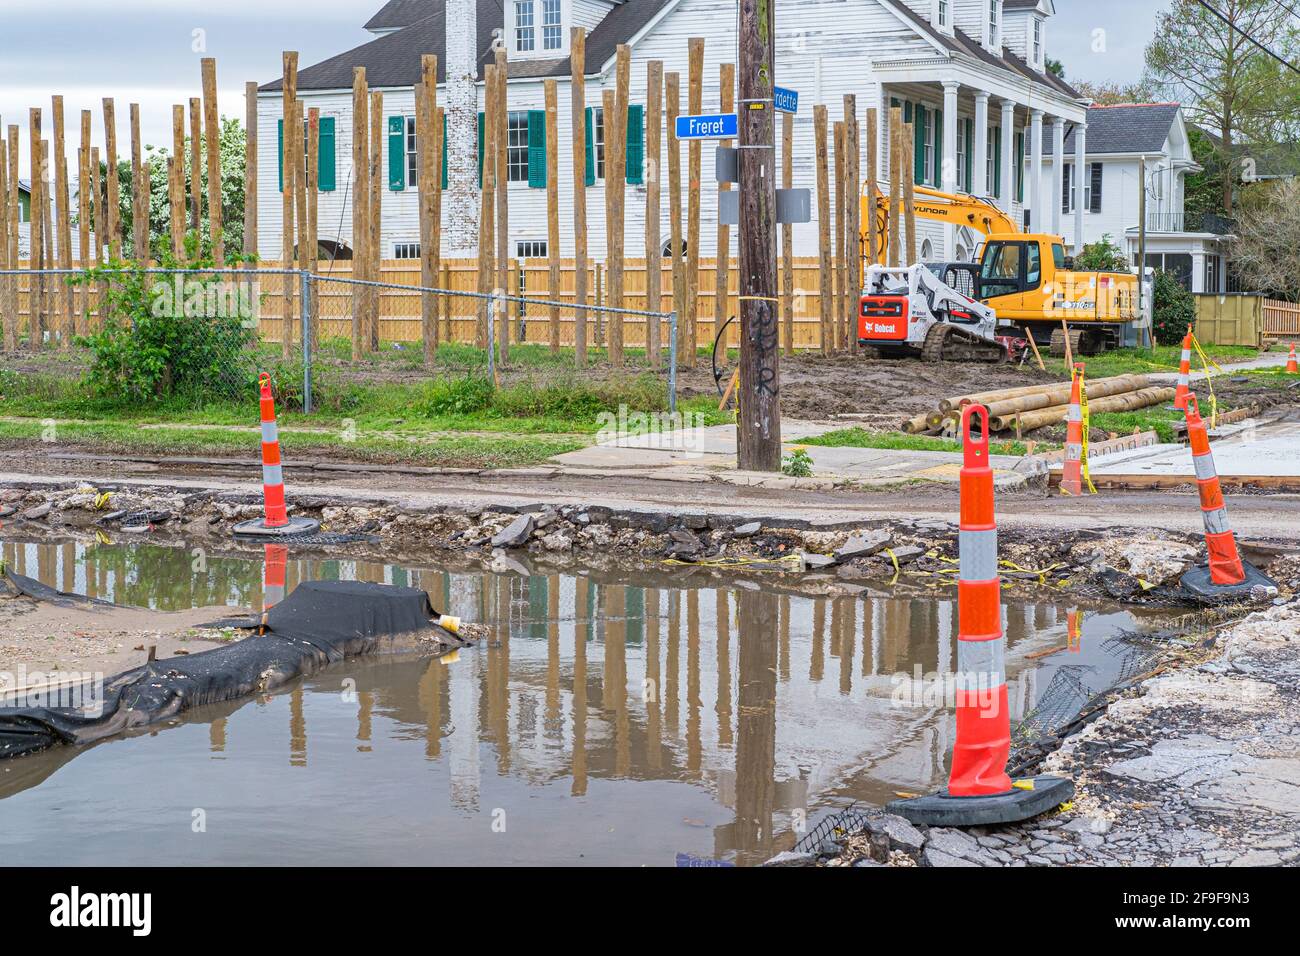 NEW ORLEANS, LA, USA - MARCH 24, 2021: New house construction, road repairs, and flooded street in Uptown Neighborhood Stock Photo